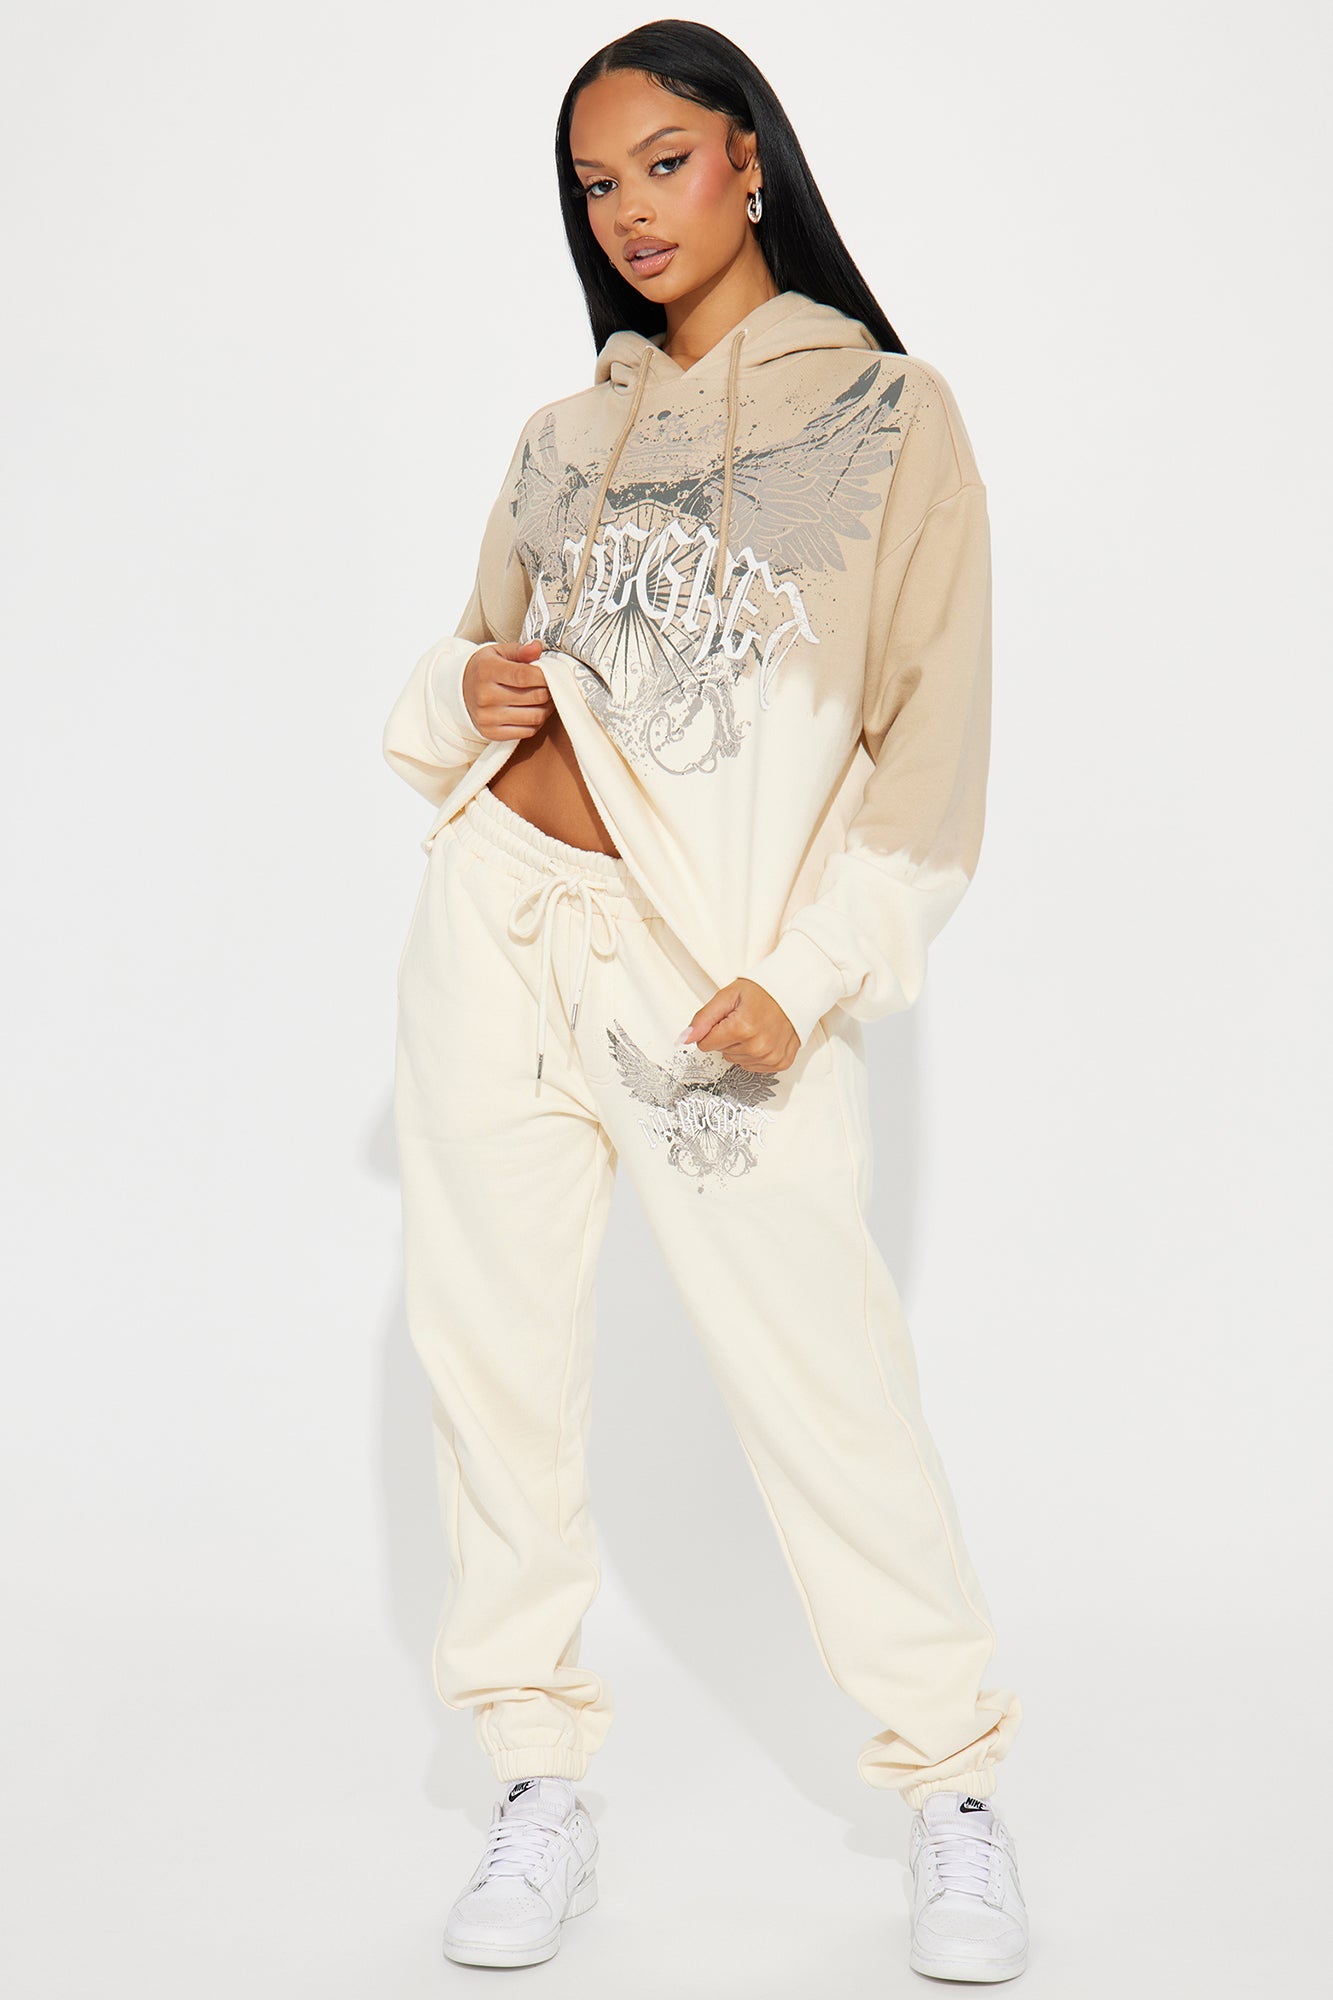 No Regrets Sweatsuit - Taupe - HCWP 